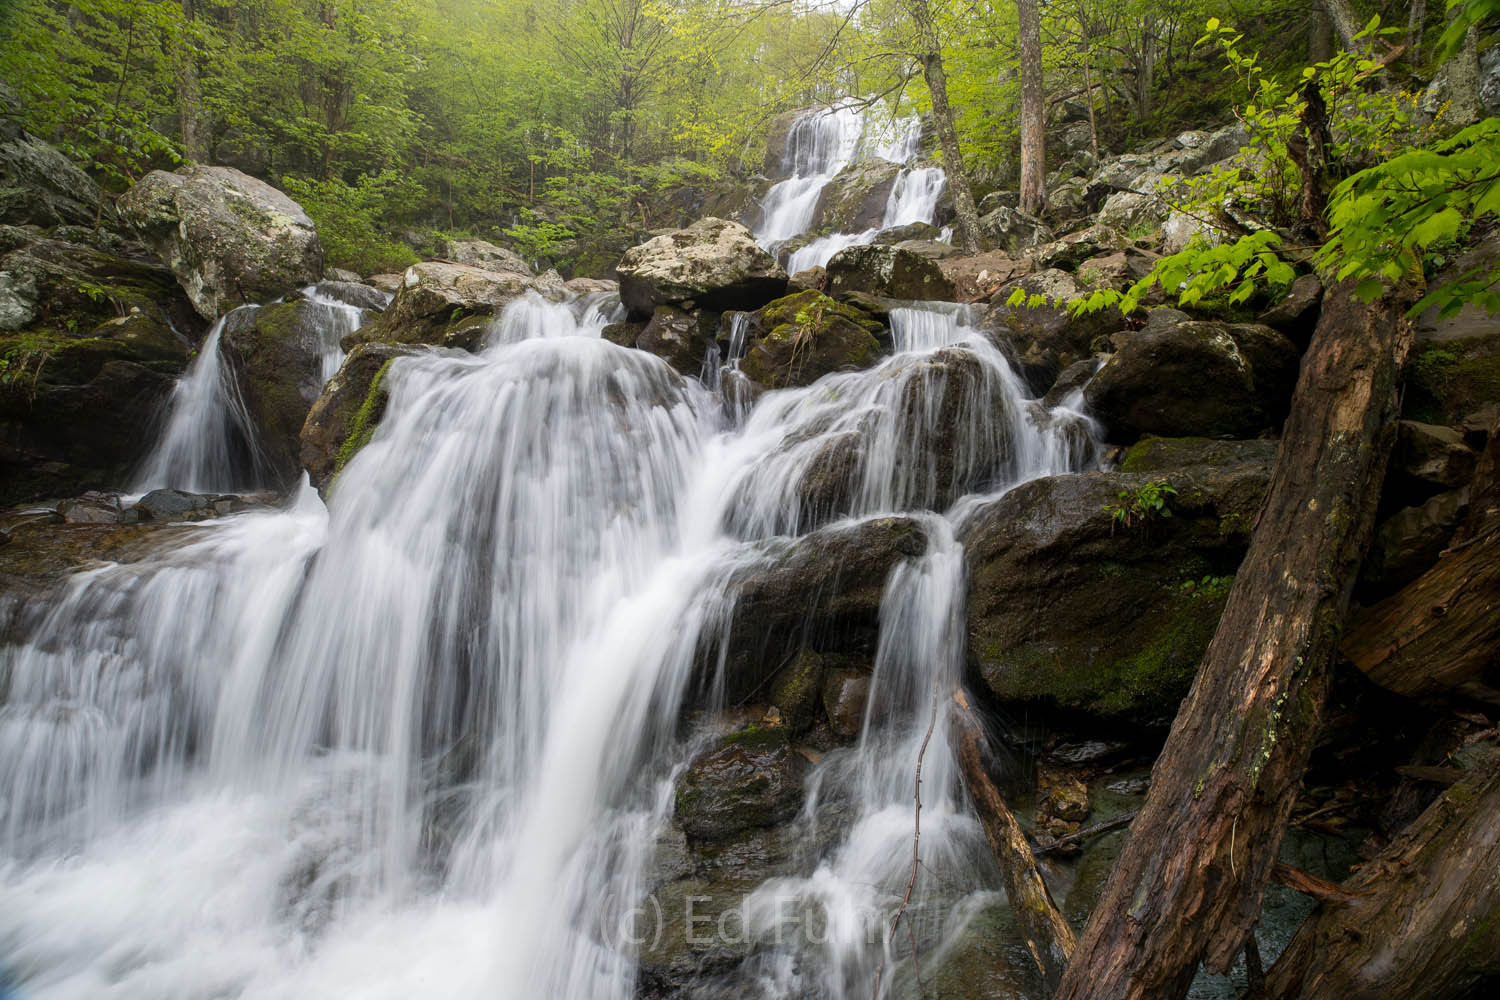 The upper part of Dark Hollow Falls, the most popular and most visited falls in Shenandoah National Park.